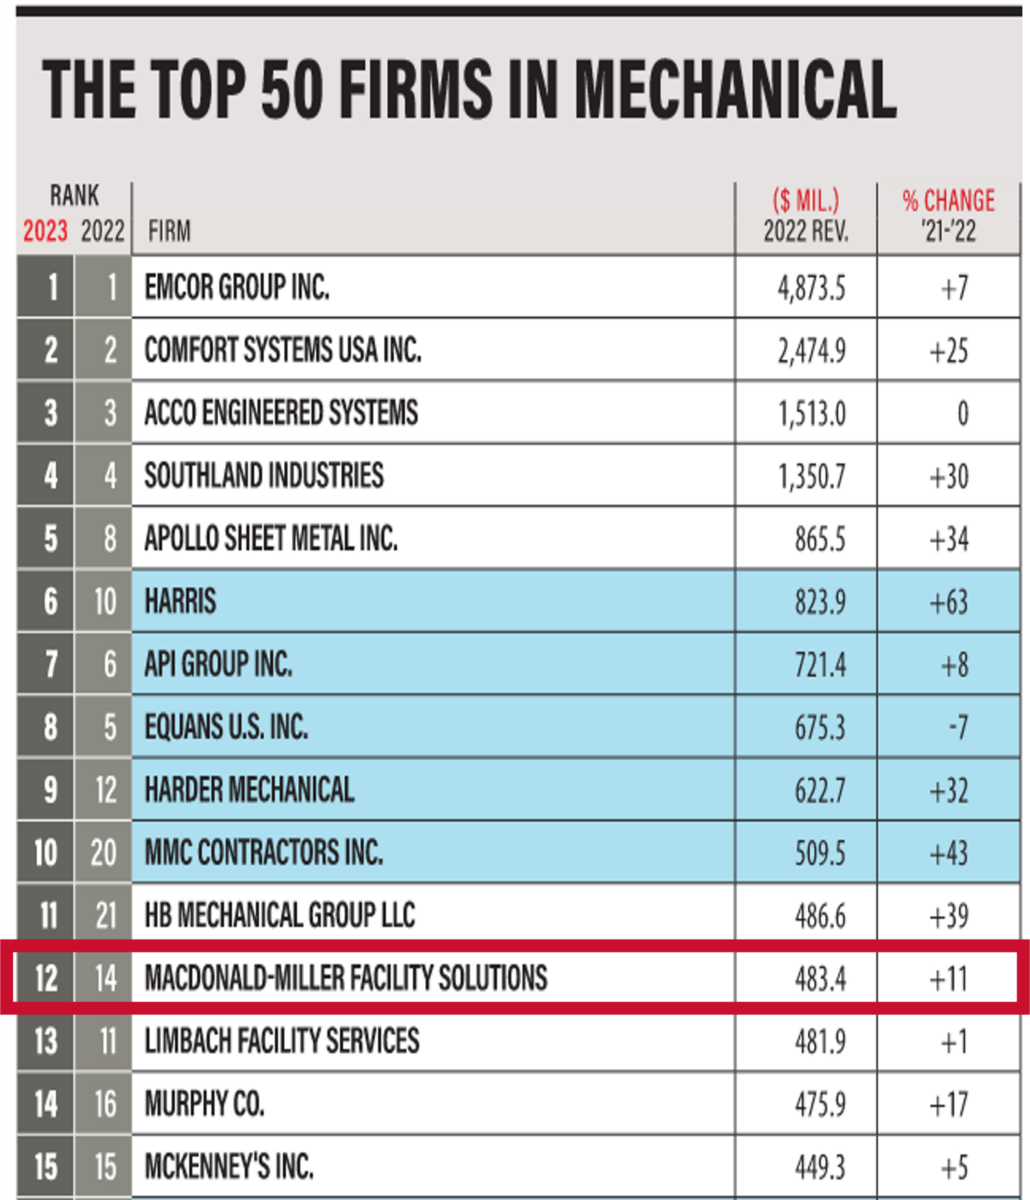 ENR (Engineering News-Record) lists the top contractors